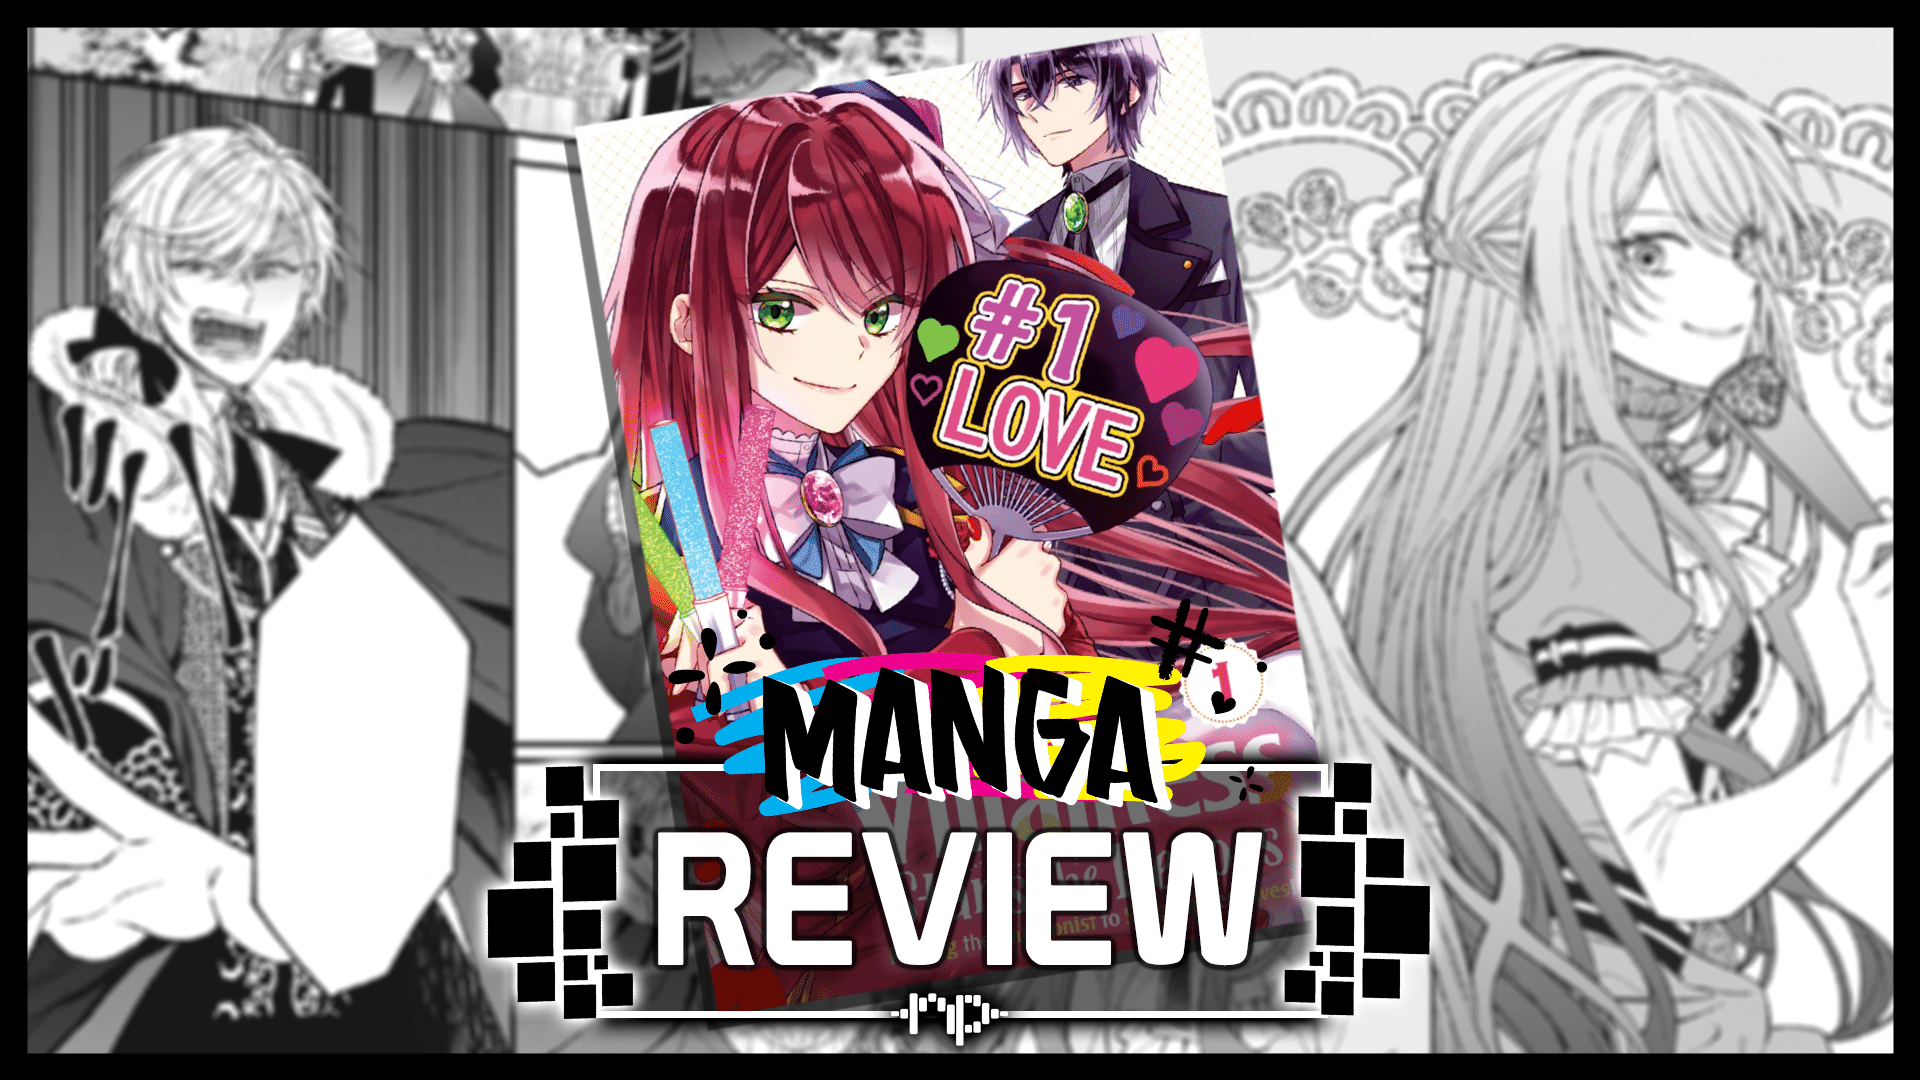 The Villainess Stans the Heroes: Playing the Antagonist to Support Her Faves! Vol. 1 Manga Review – A Lighthearted Isekai